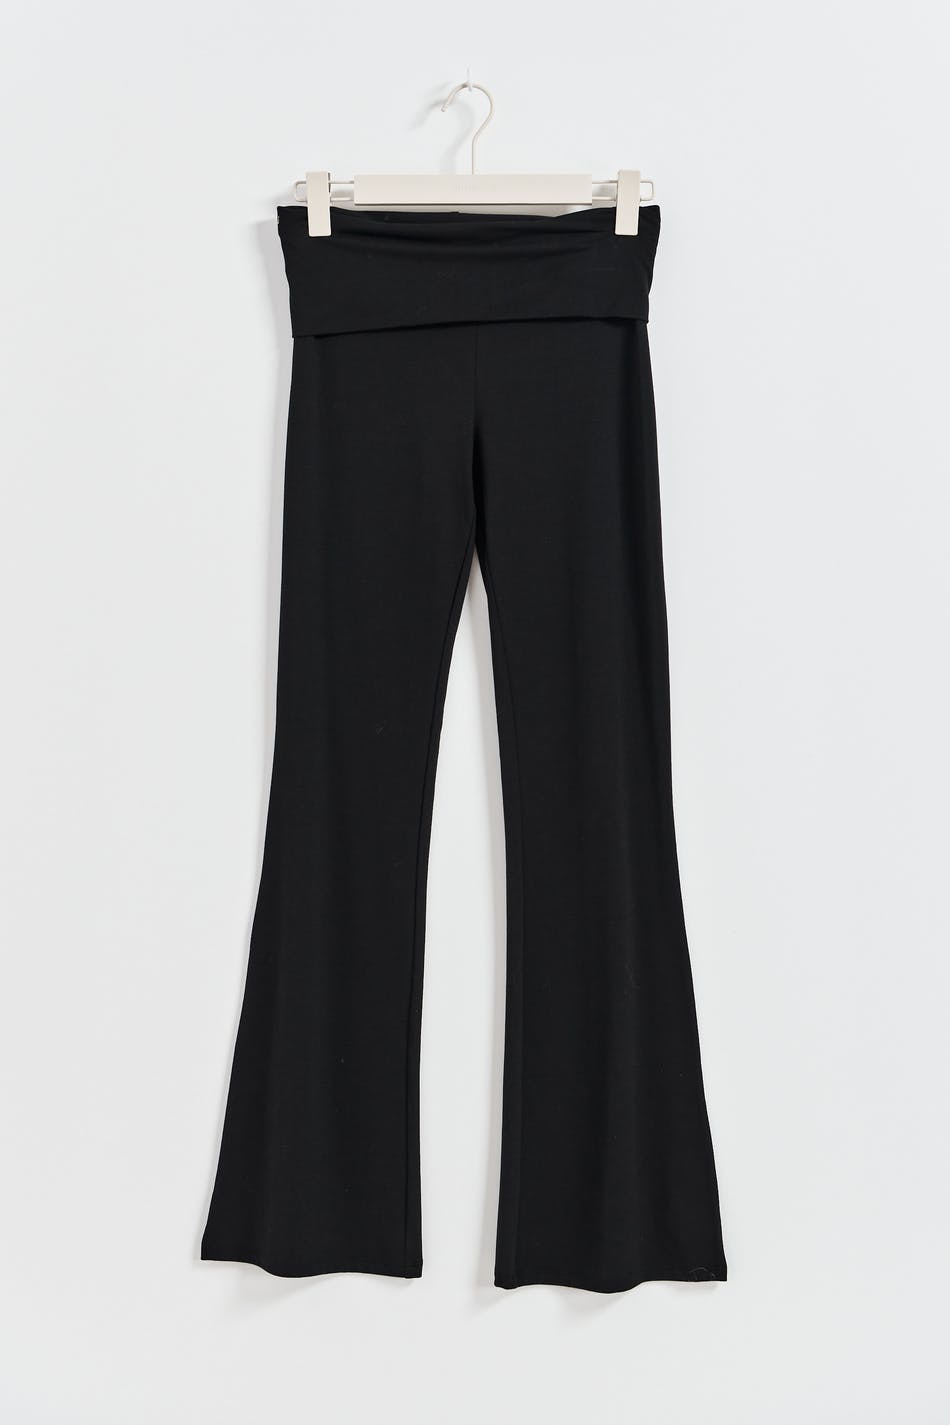 Reiss Haisley Tailored Flared Suit Trousers | REISS USA